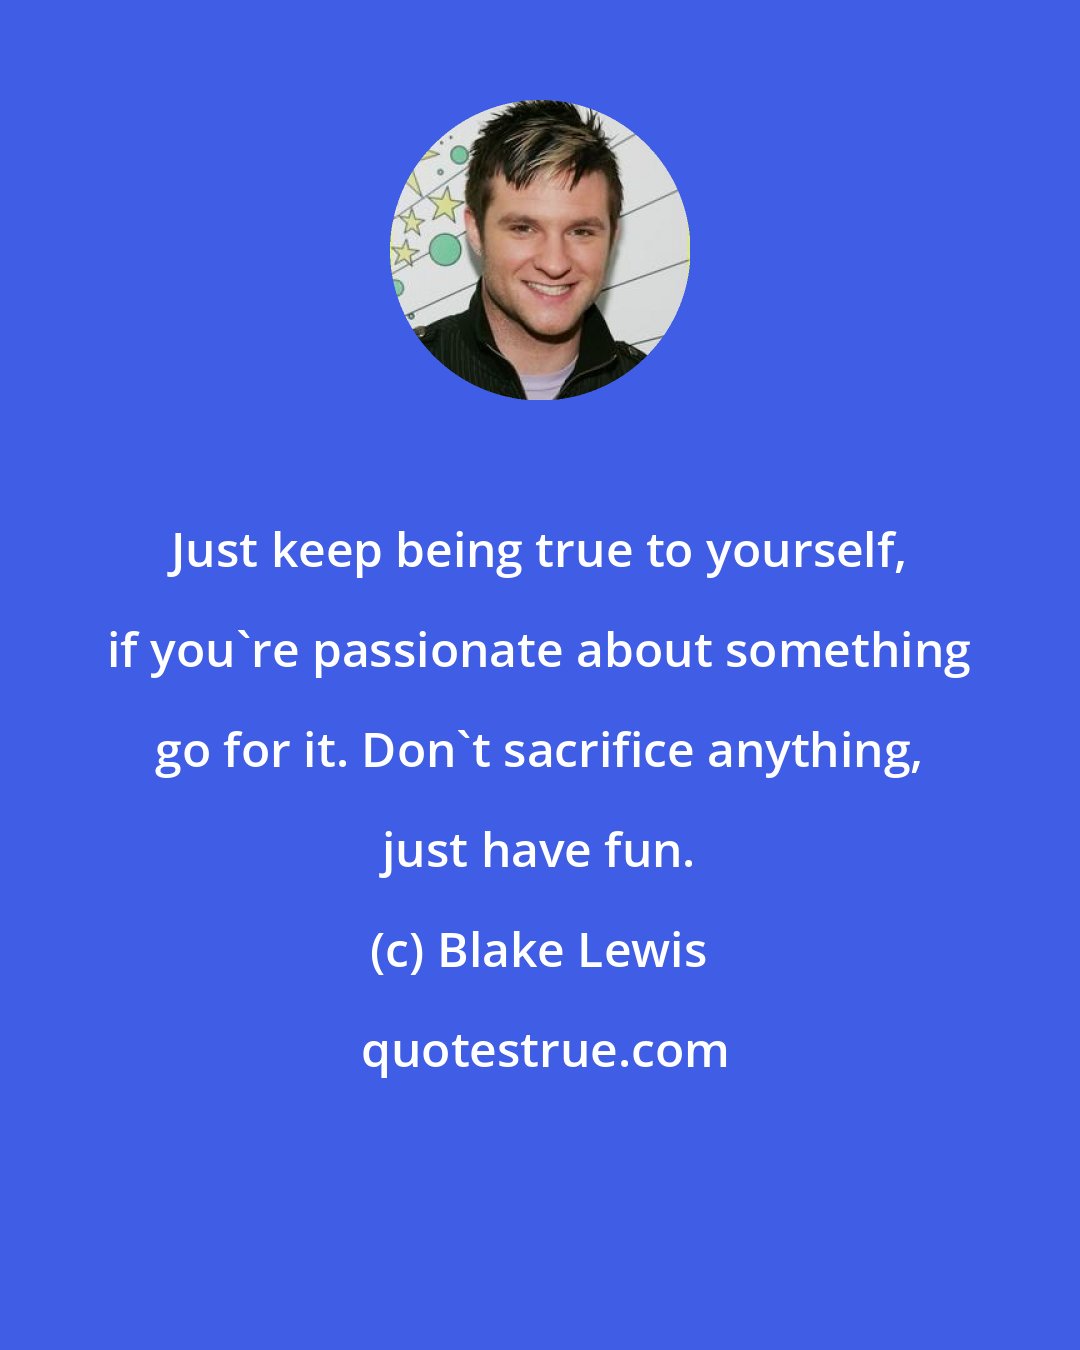 Blake Lewis: Just keep being true to yourself, if you're passionate about something go for it. Don't sacrifice anything, just have fun.